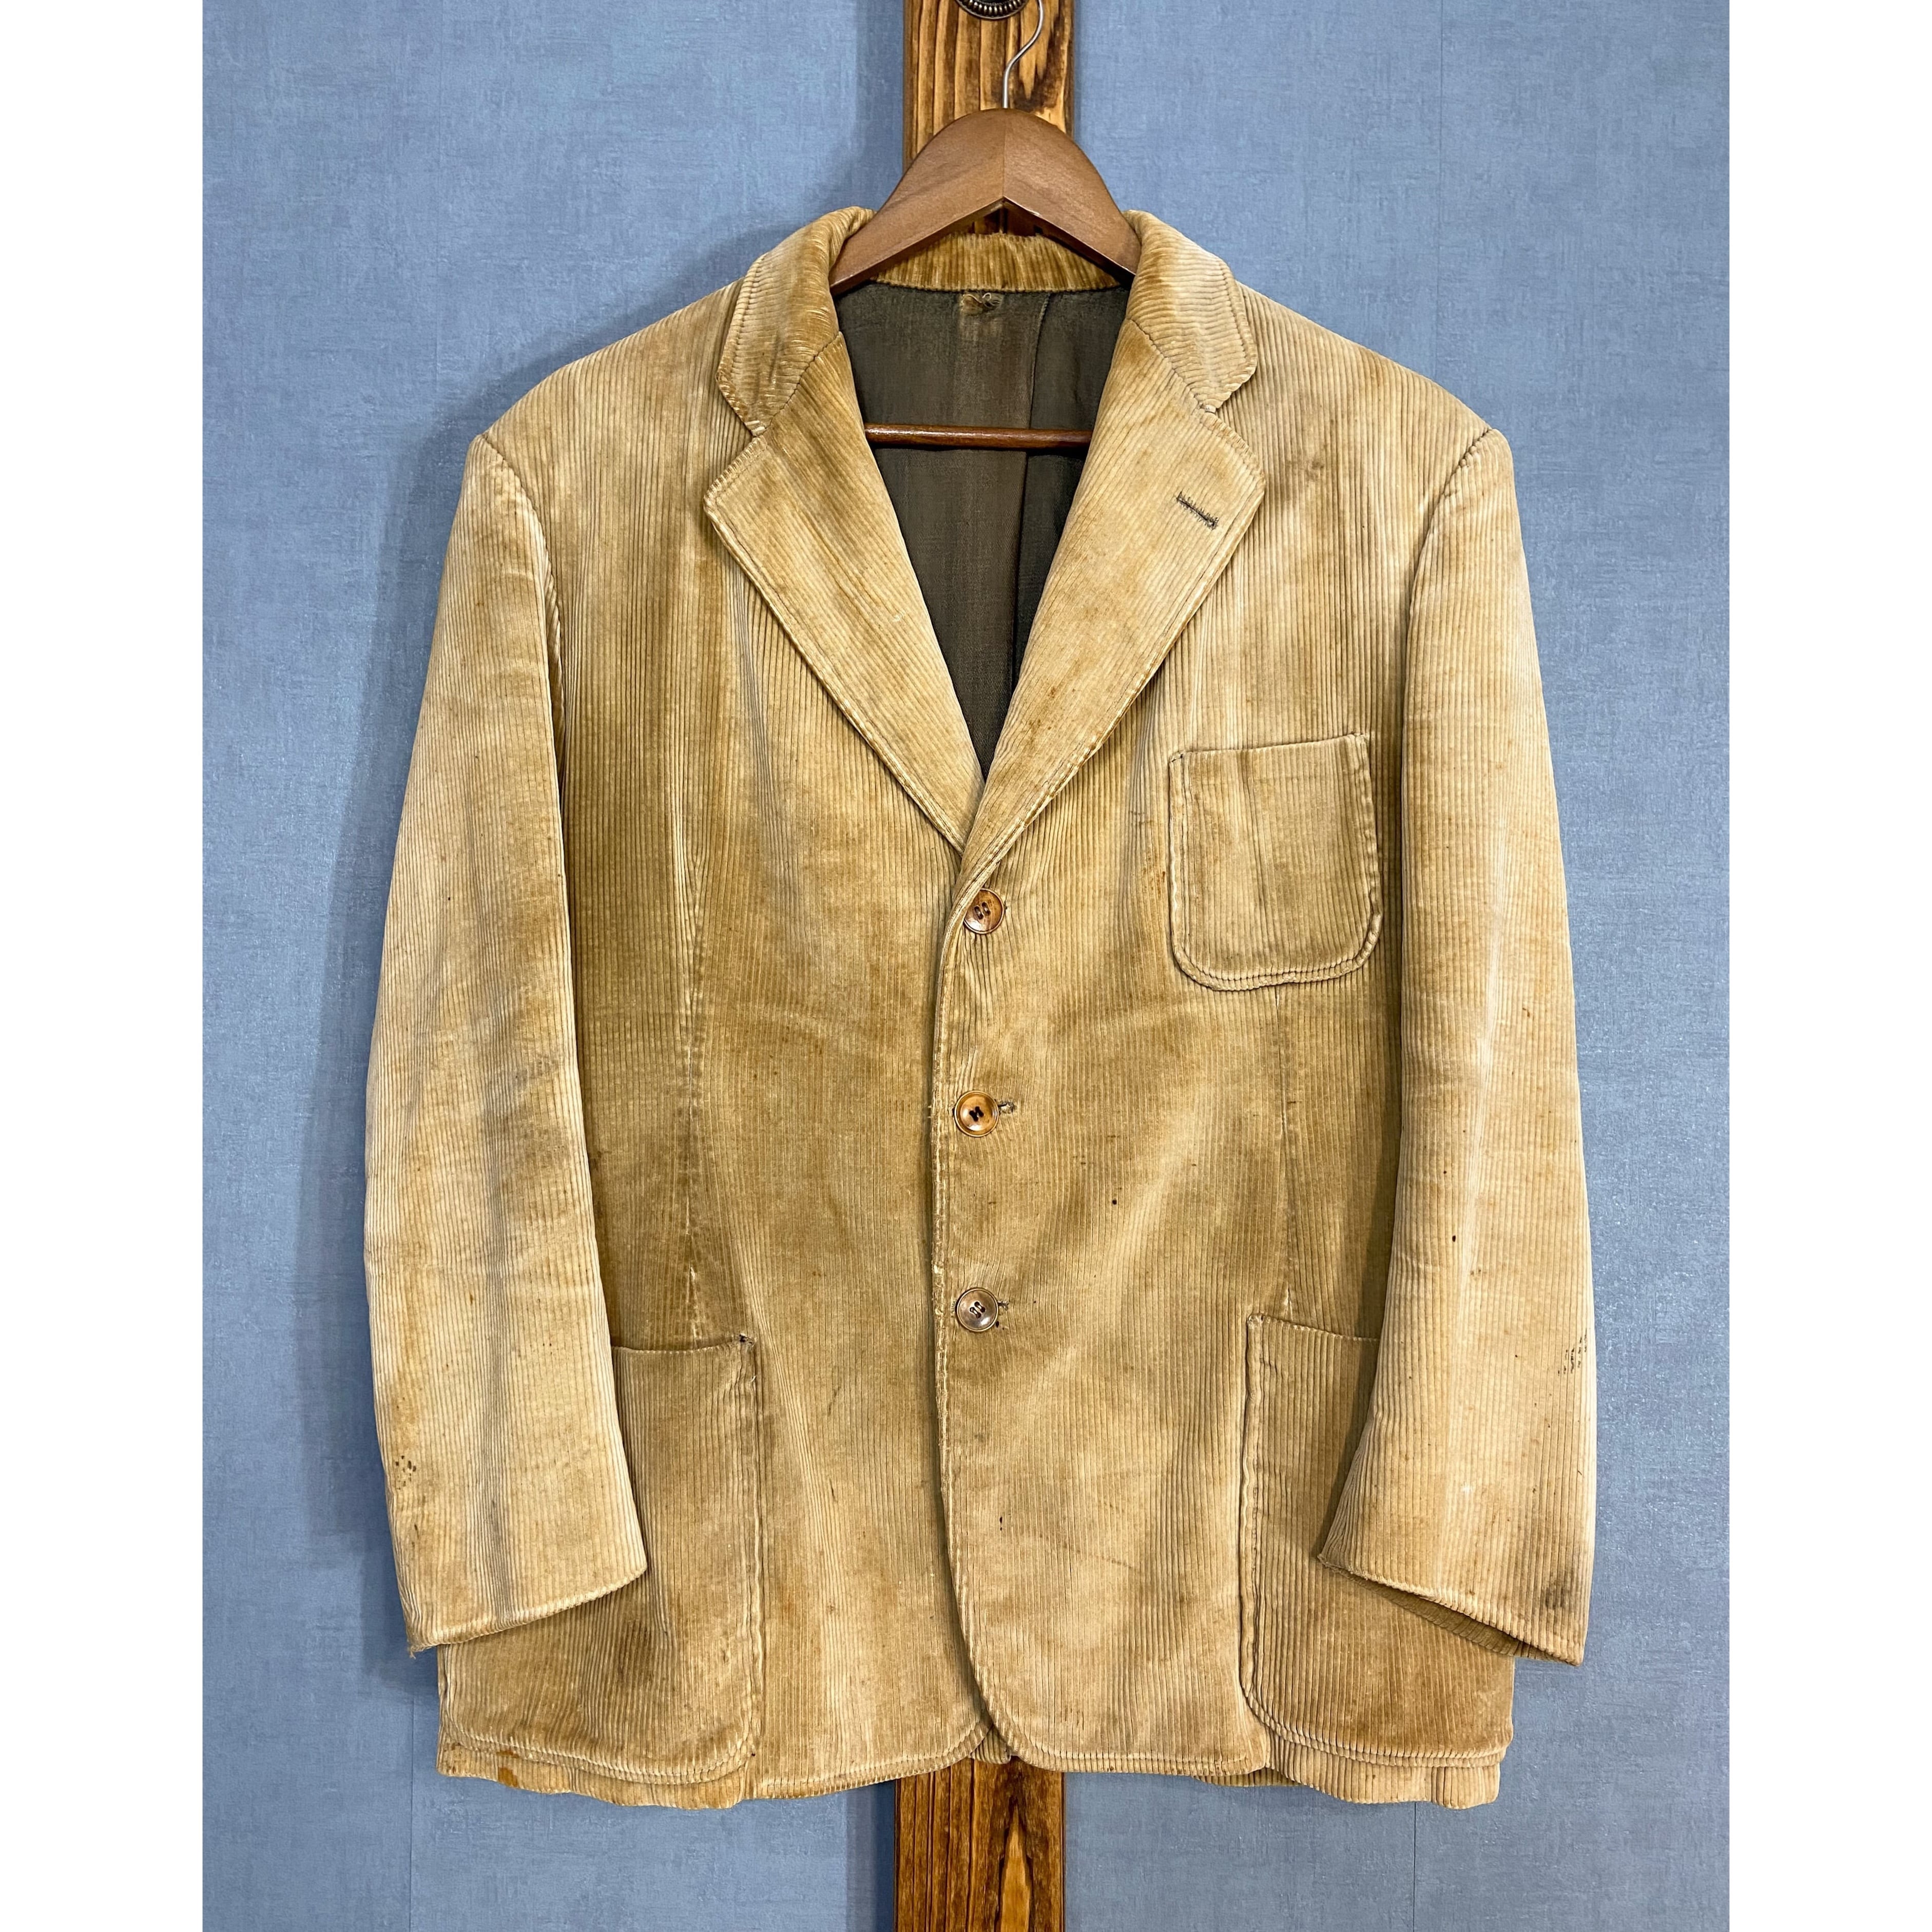 1930s】Heavy Corduroy Farmers Jacket, with Wood Buttons!! | freely